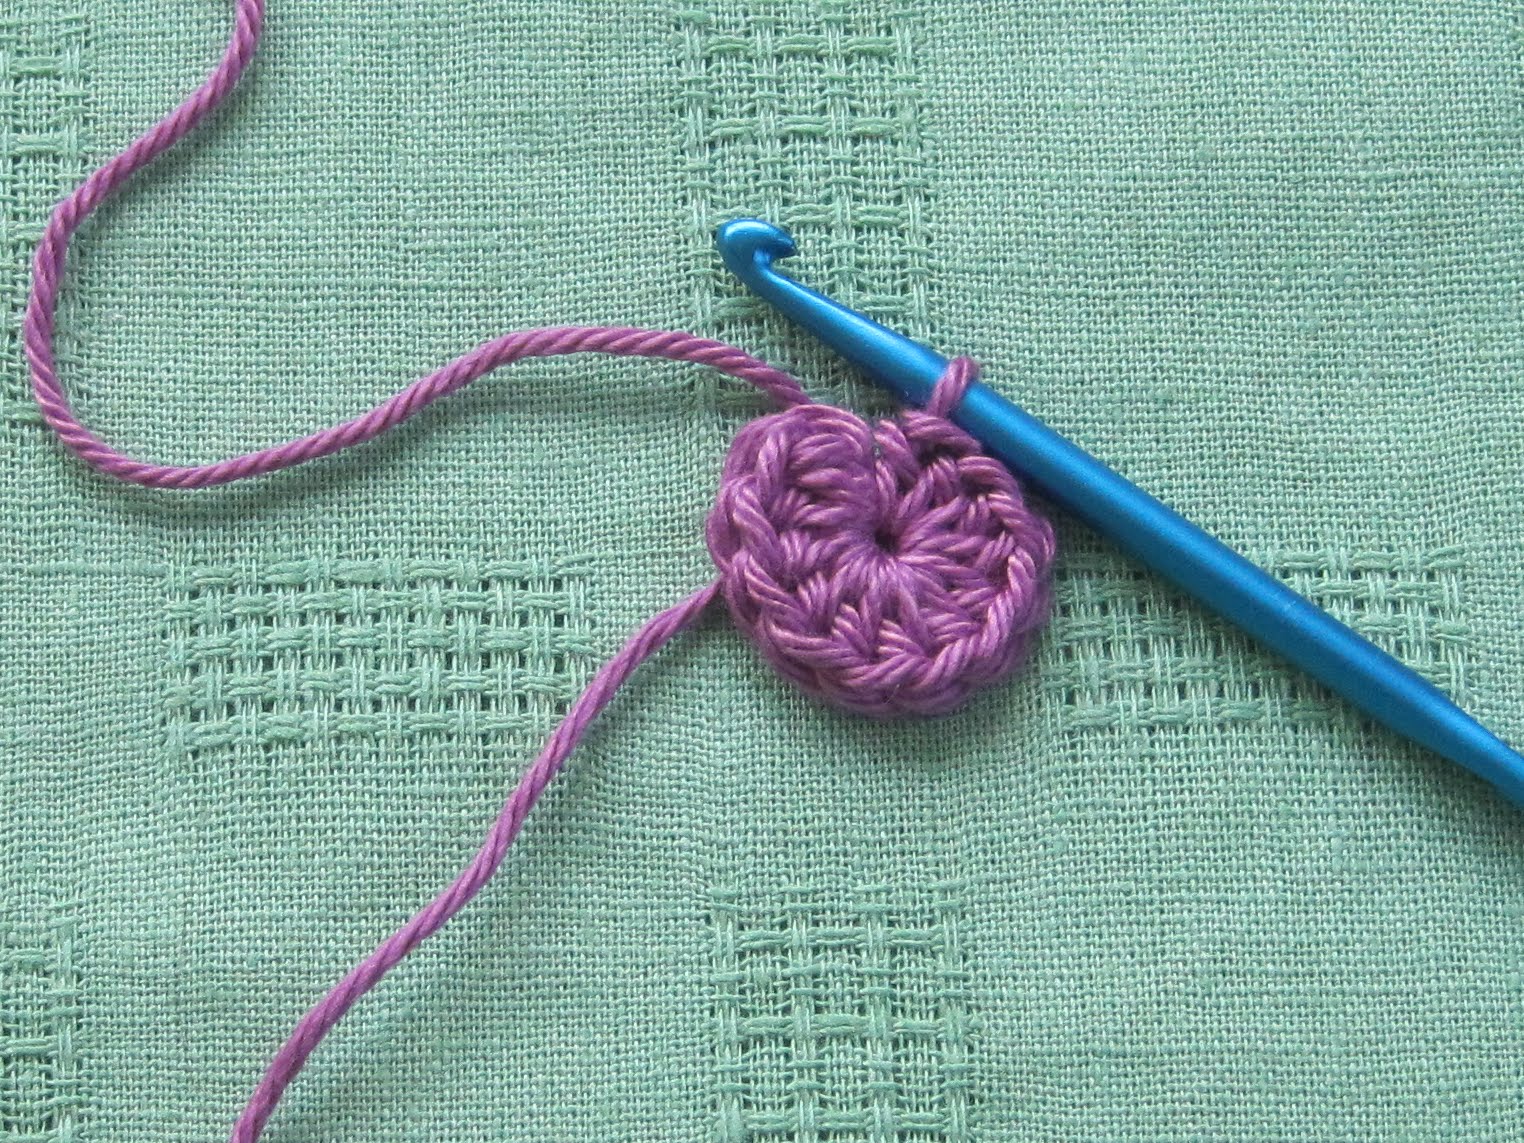 Crochet Granny Square Full Book Cover With Magnetic Button 